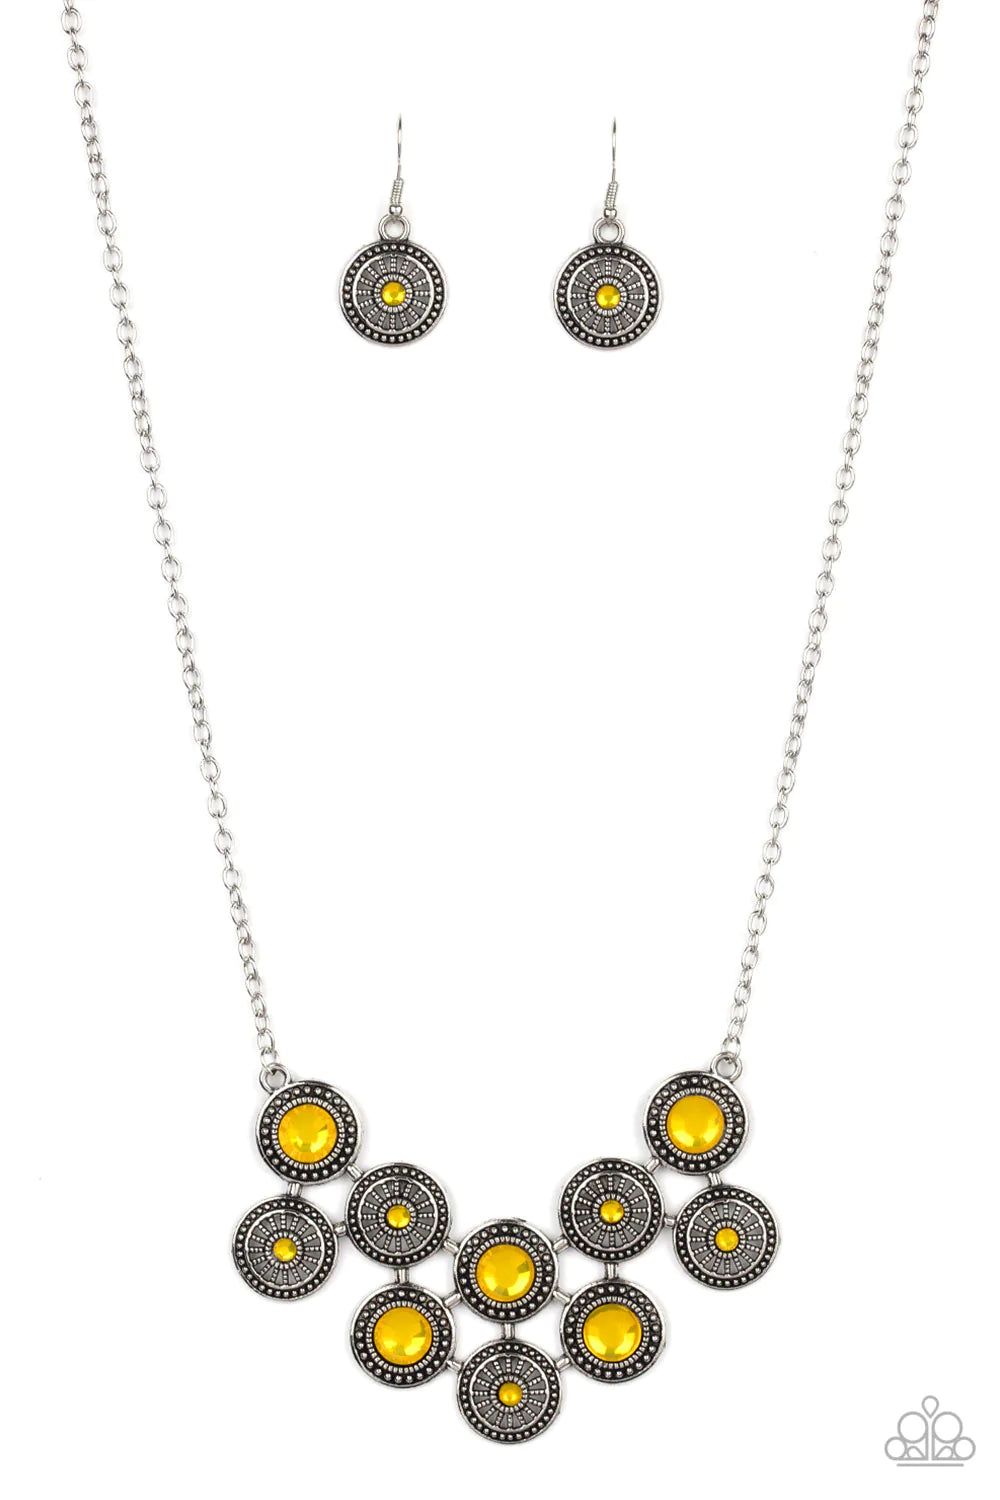 Paparazzi Necklace ~ Whats Your Star Sign? - Yellow